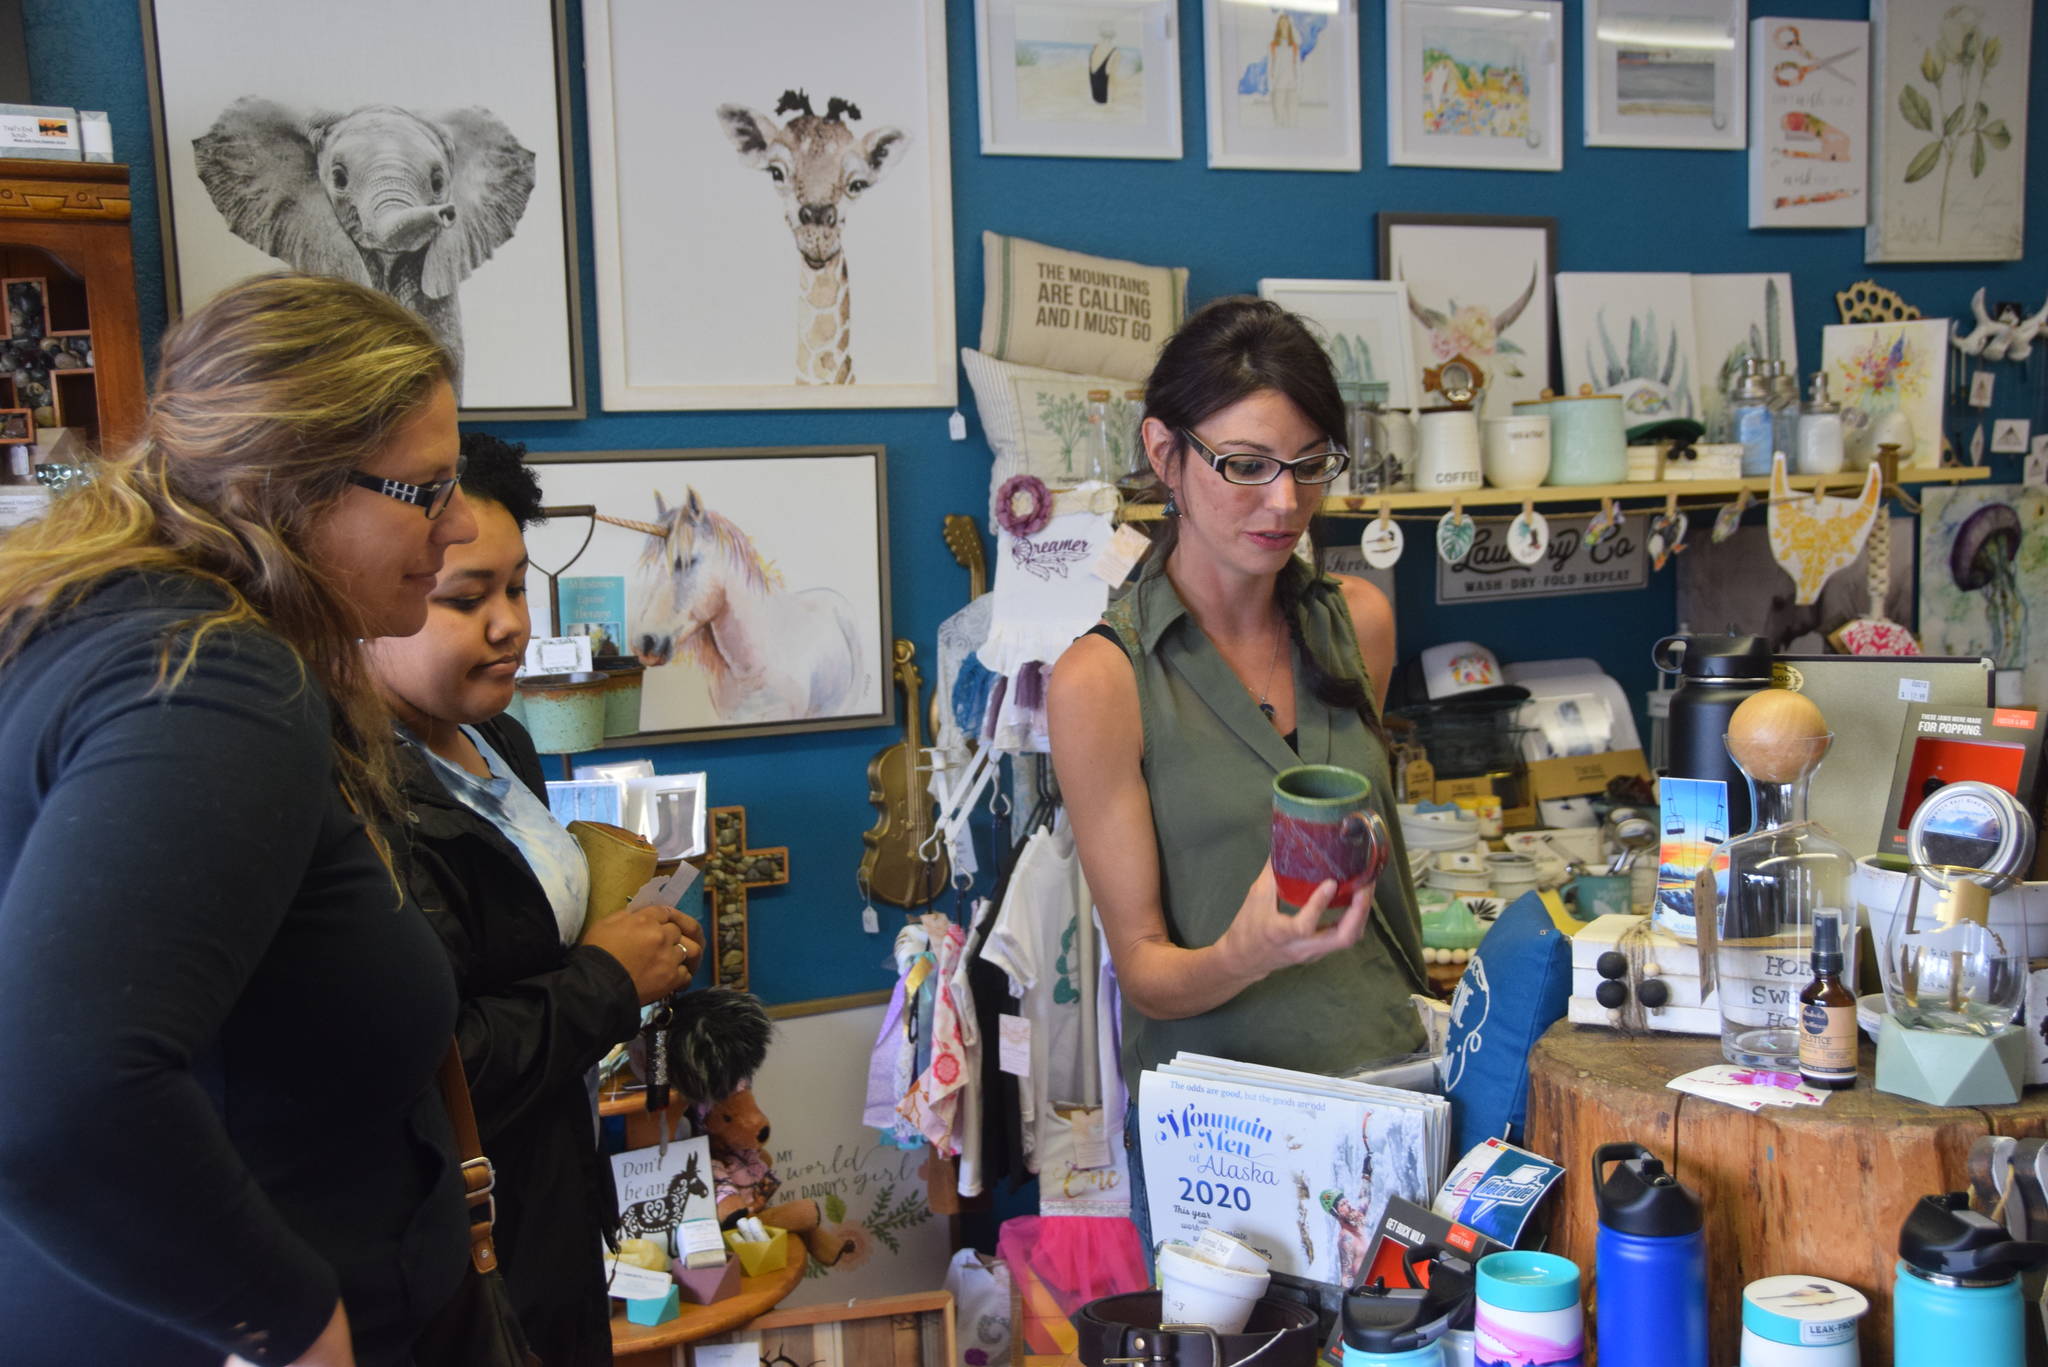 Localz owner Angel Stanton, right, shows Heidi Vann, left, and Denali Jackson, center, some of the products featured in her store on July 11, 2019 in Nikiski, Alaska. (Photo by Brian Mazurek/Peninsula Clarion)